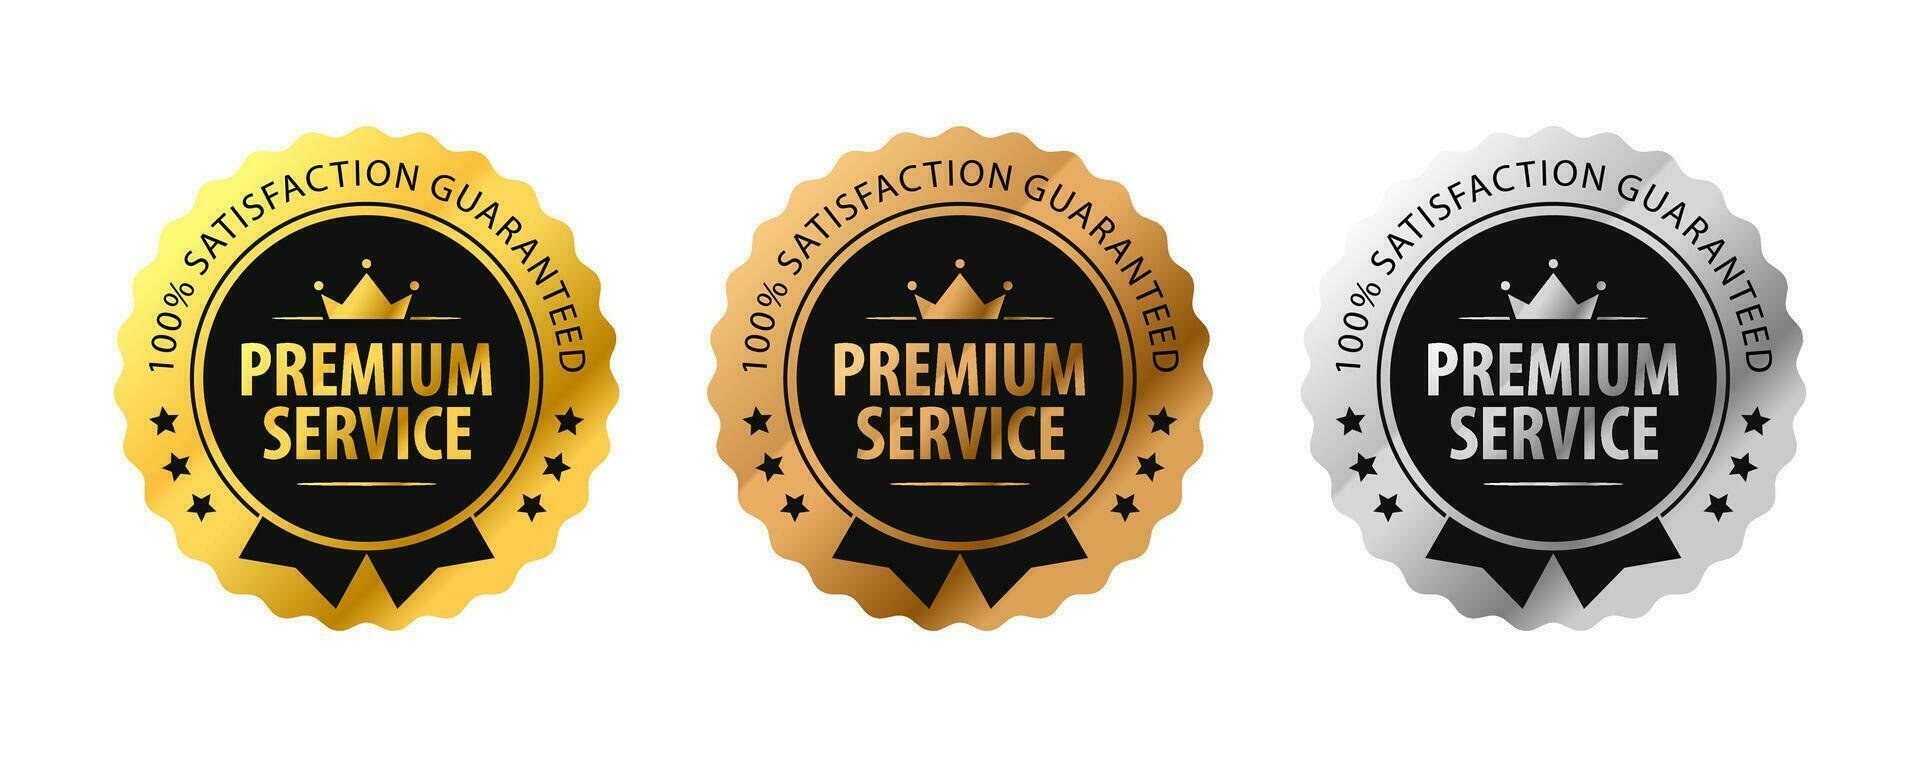 Premium Service elegant label design with gold bronze silver color. Isolated on White. Vector Illustration